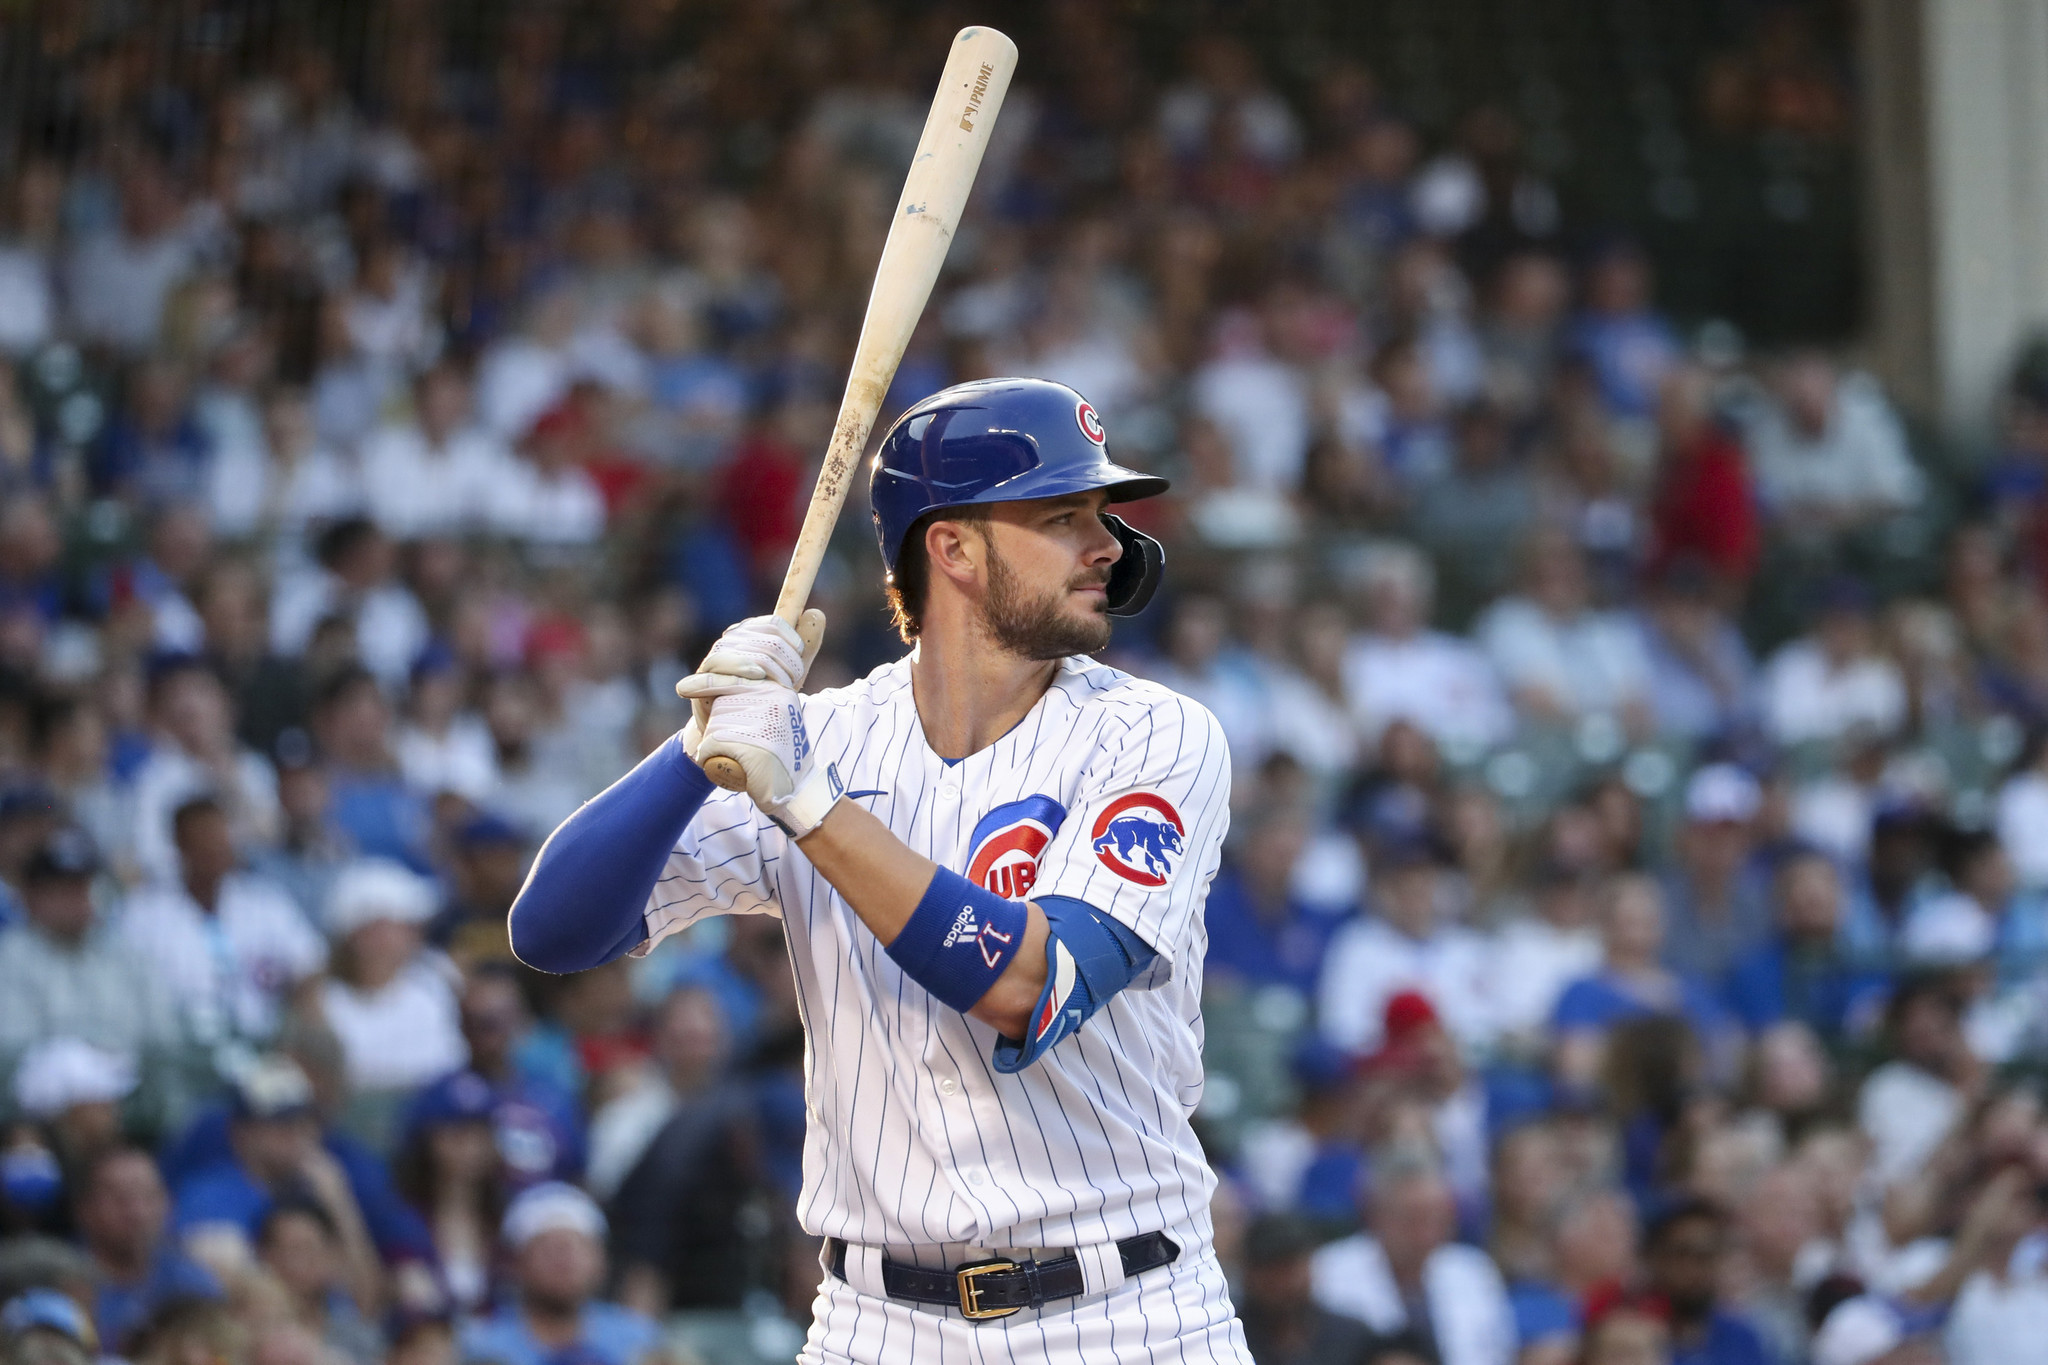 The advice Cubs teammates have given Kris Bryant in his transition